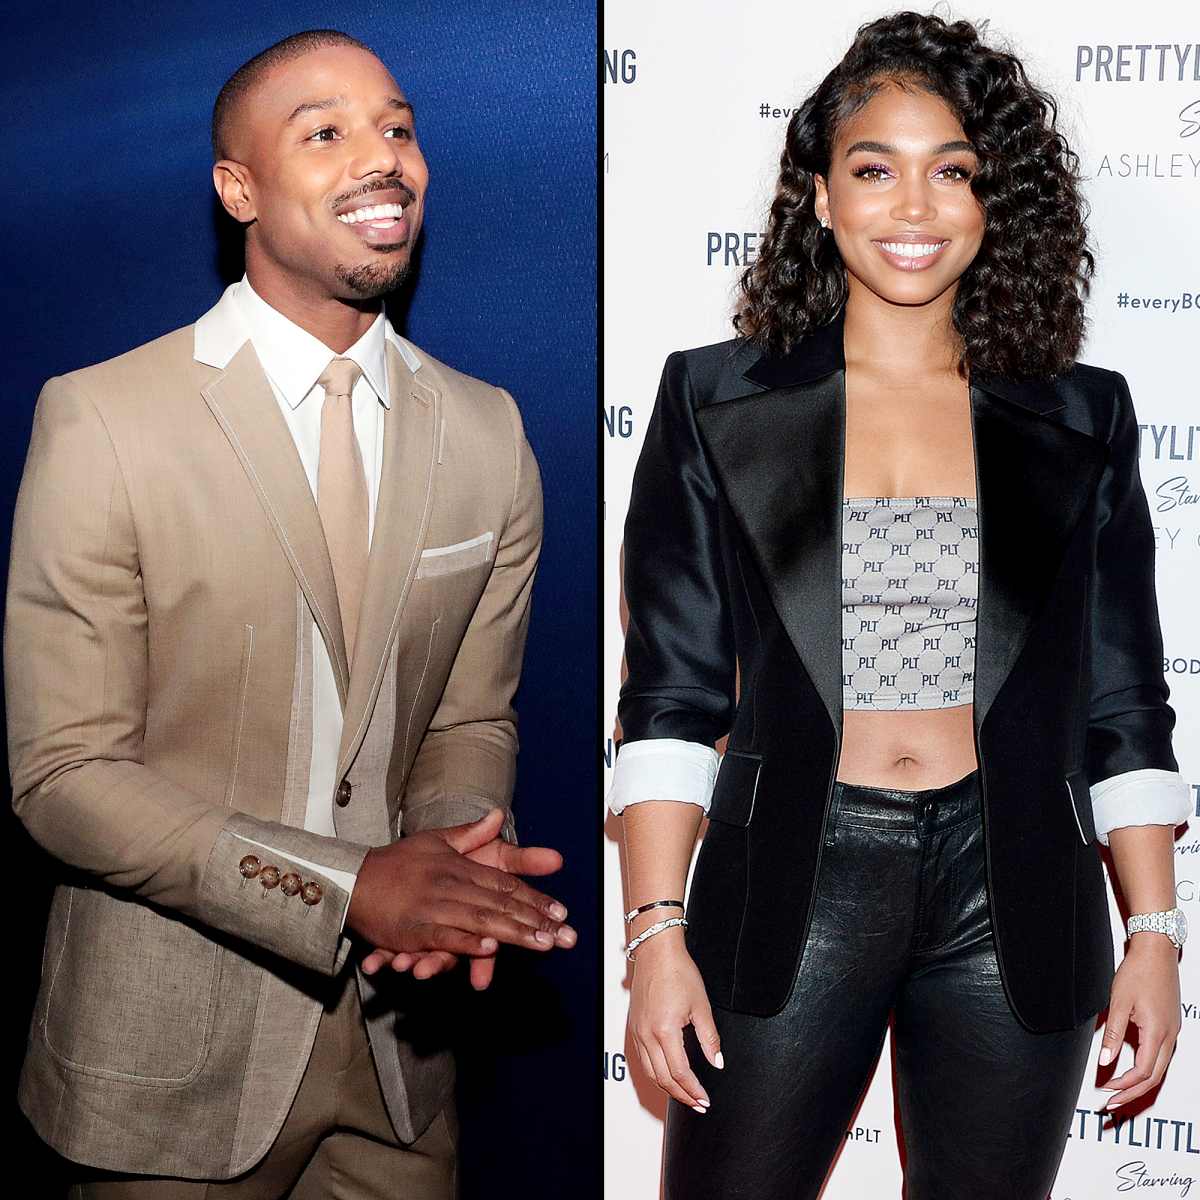 MichaelBJordan stepped into the ring in #Paris last night for the